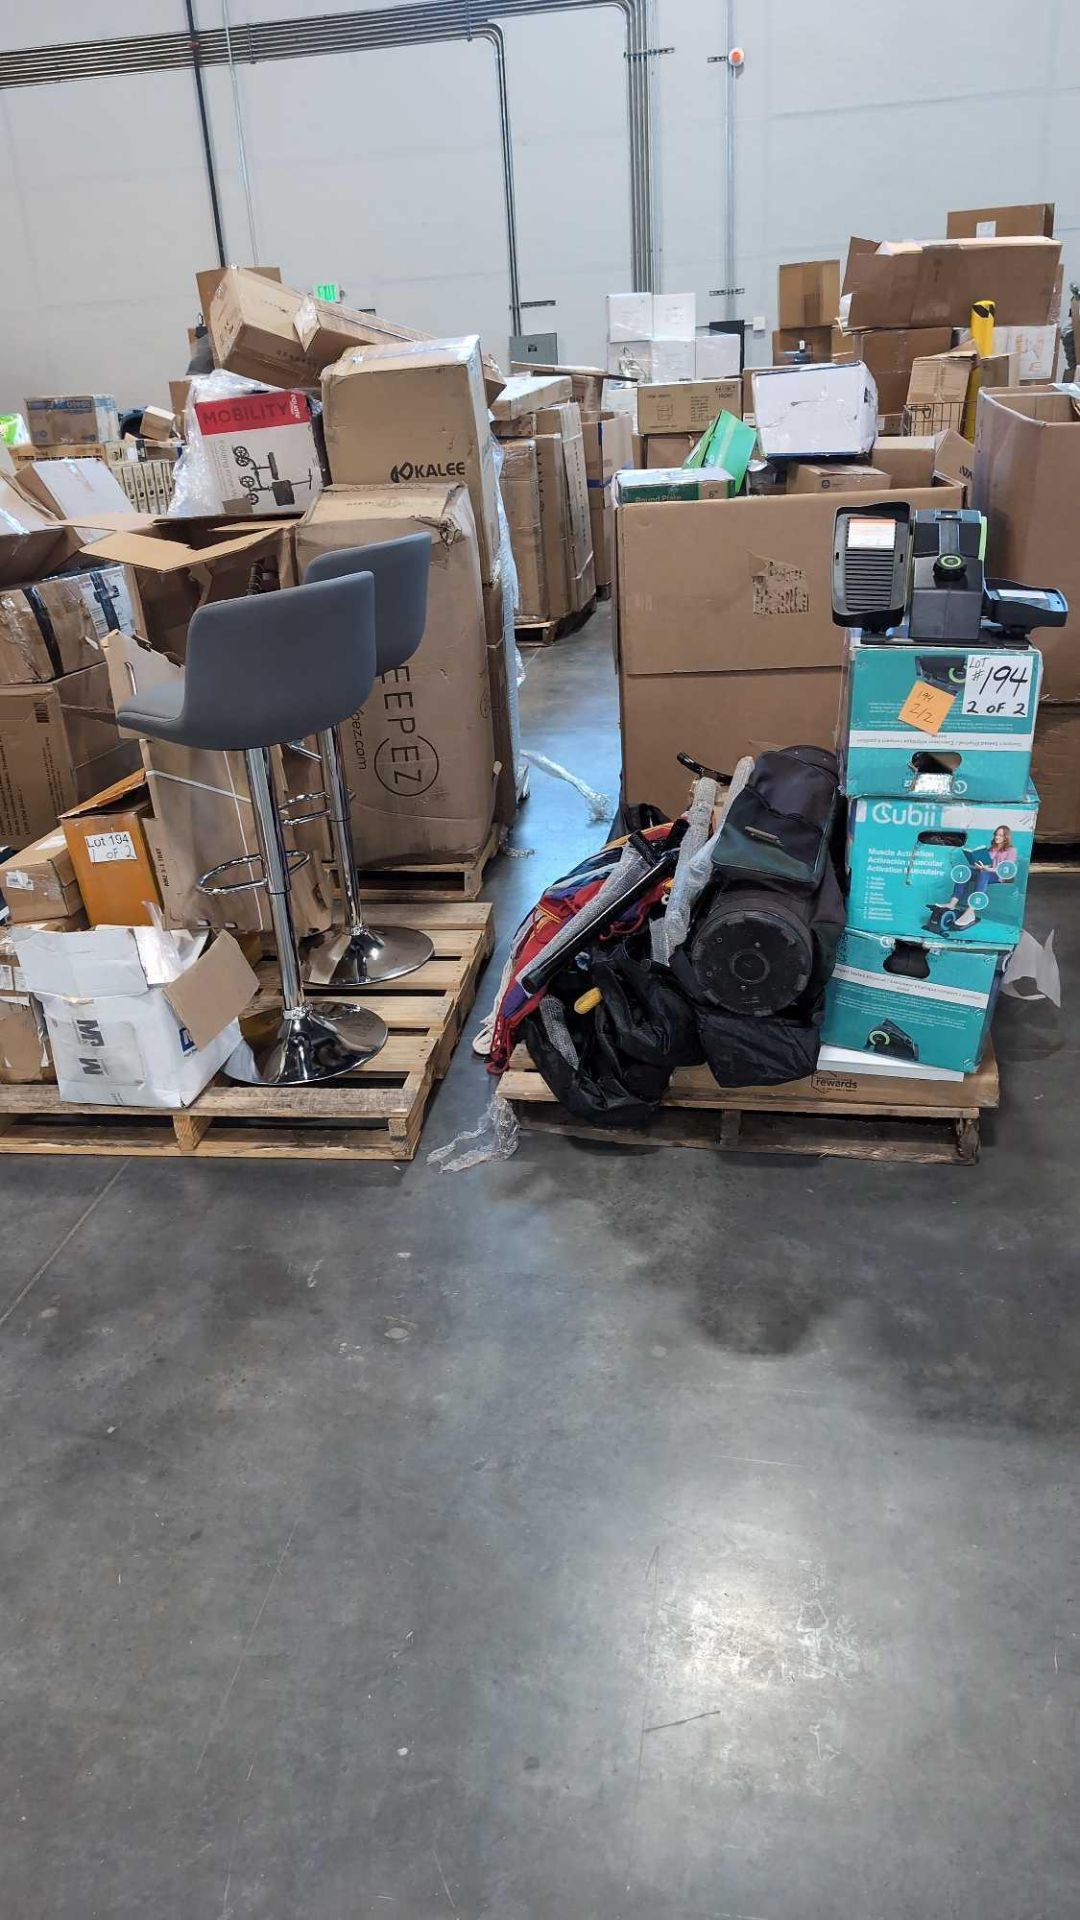 Two pallets-stools, Golf club, Cubii Compact Seated bike, hammocks, and more - Image 13 of 13